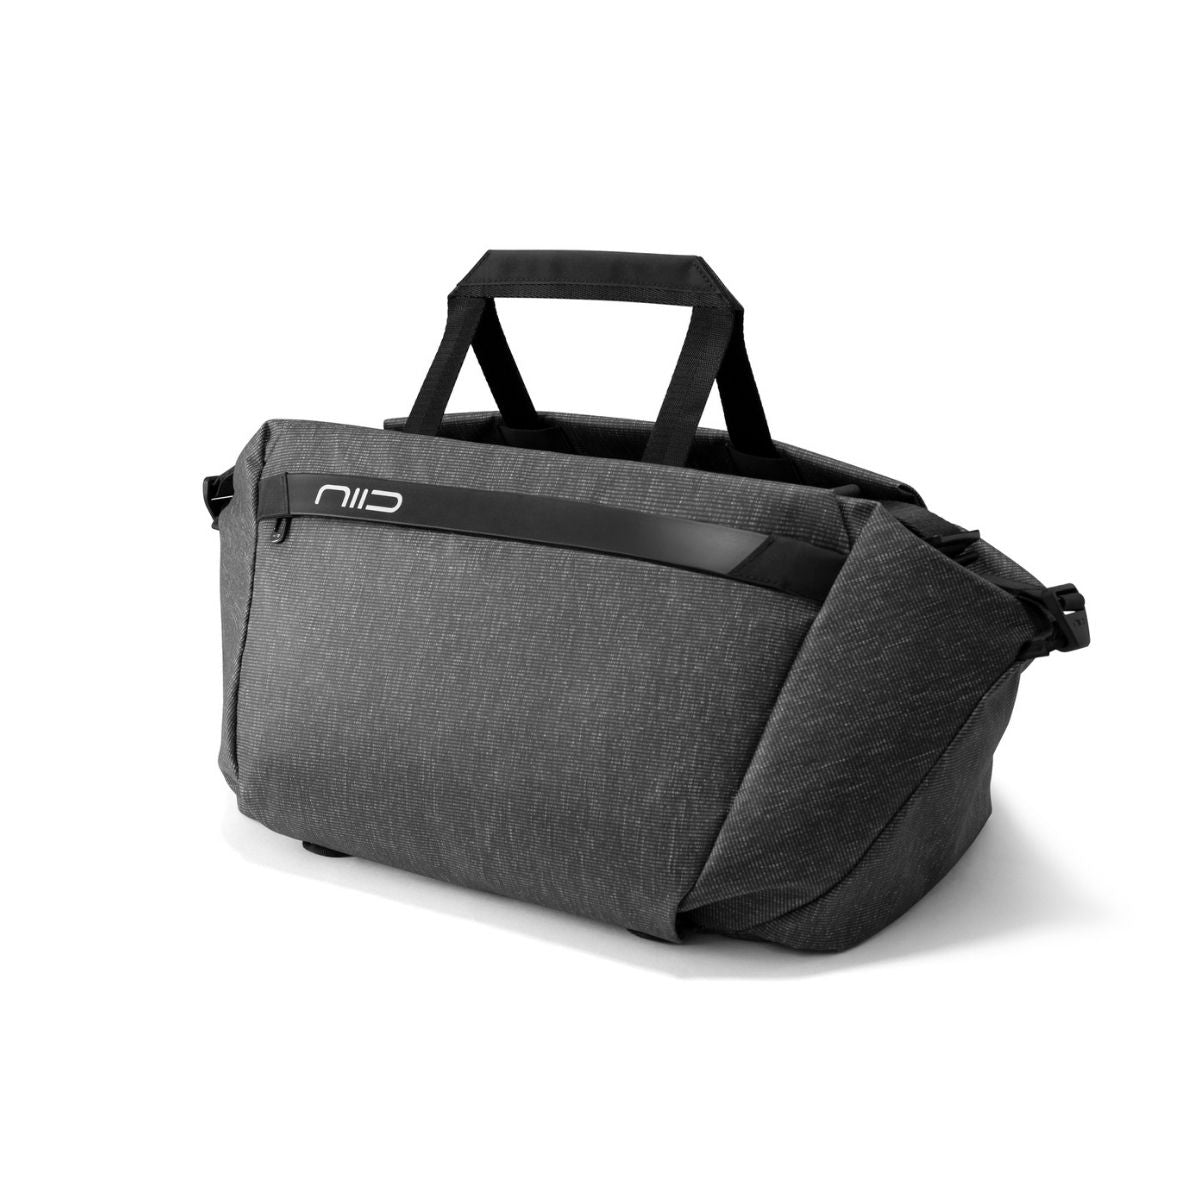 NIID CACHE Hybrid Sling and Duffle w/ Accessories | NIID - Wake Concept Store  